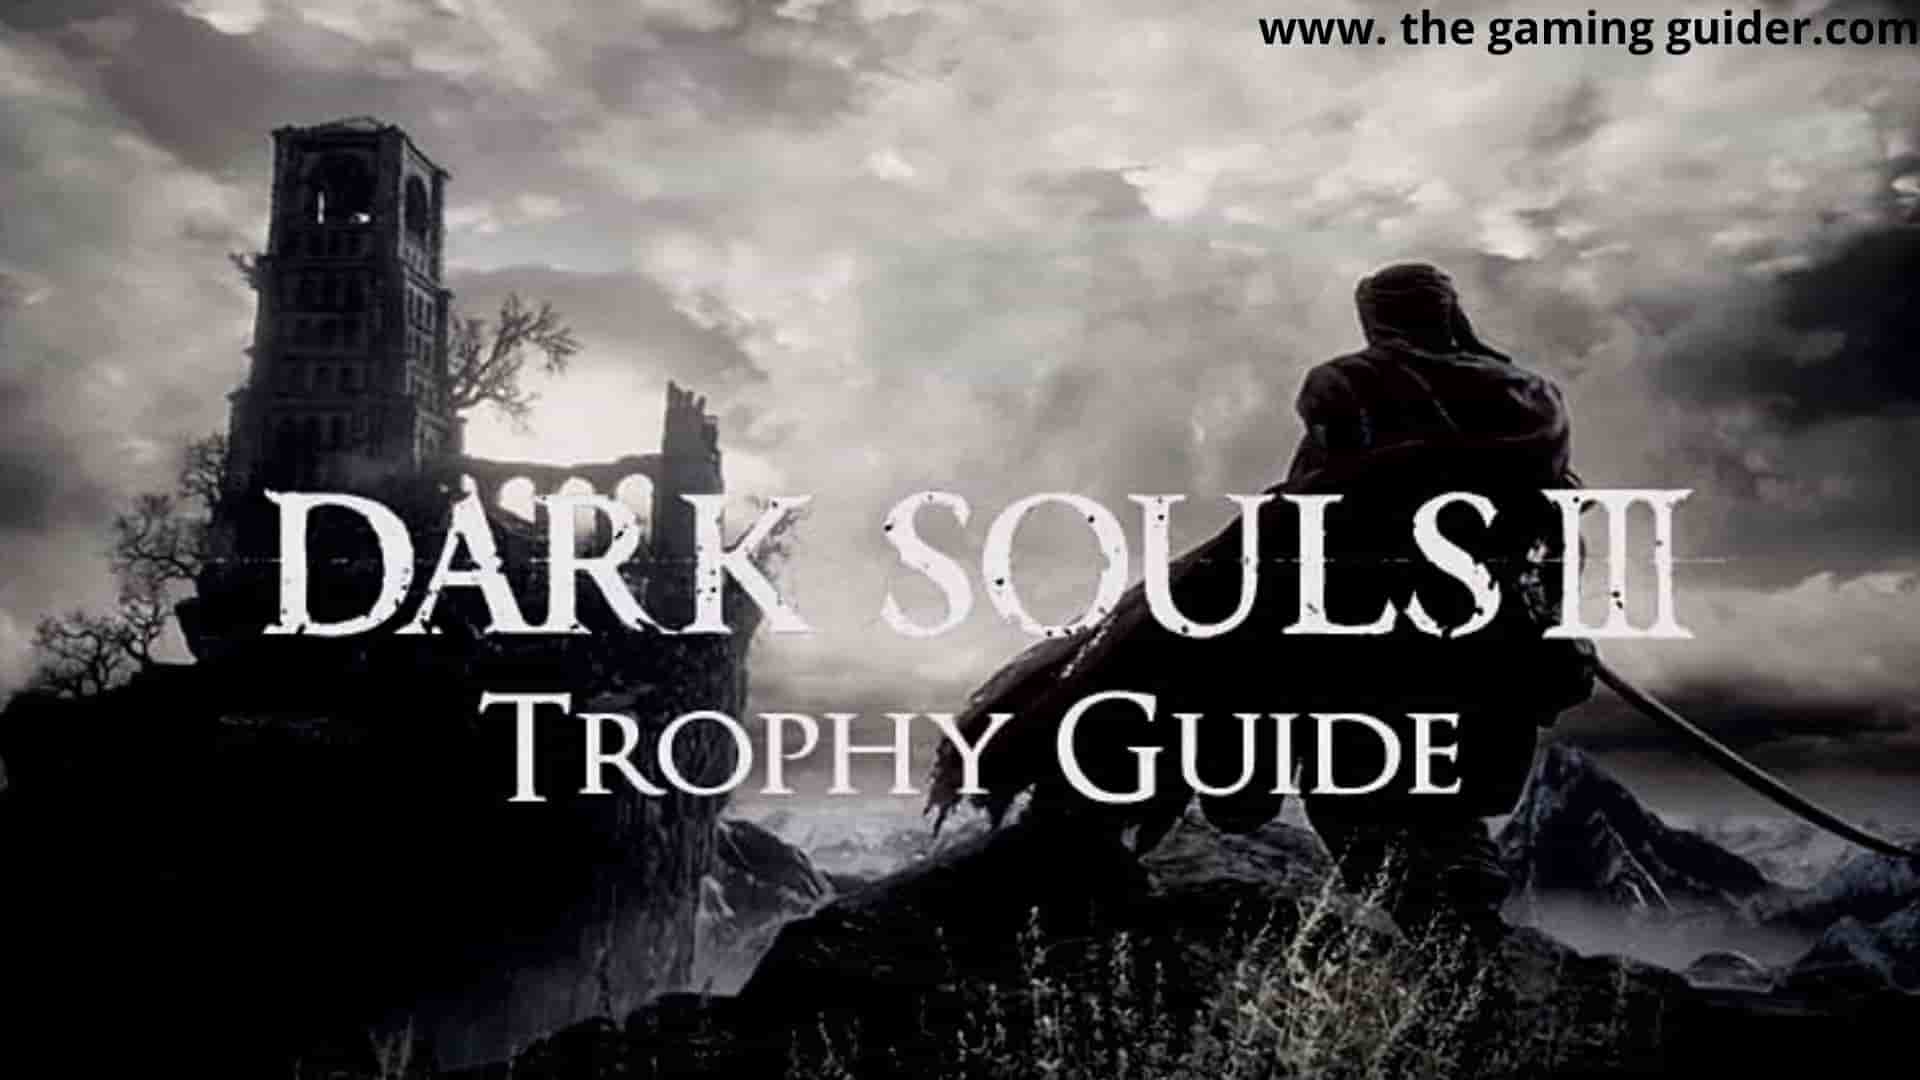 dark souls 3 trophy guide - the gaming guider -min